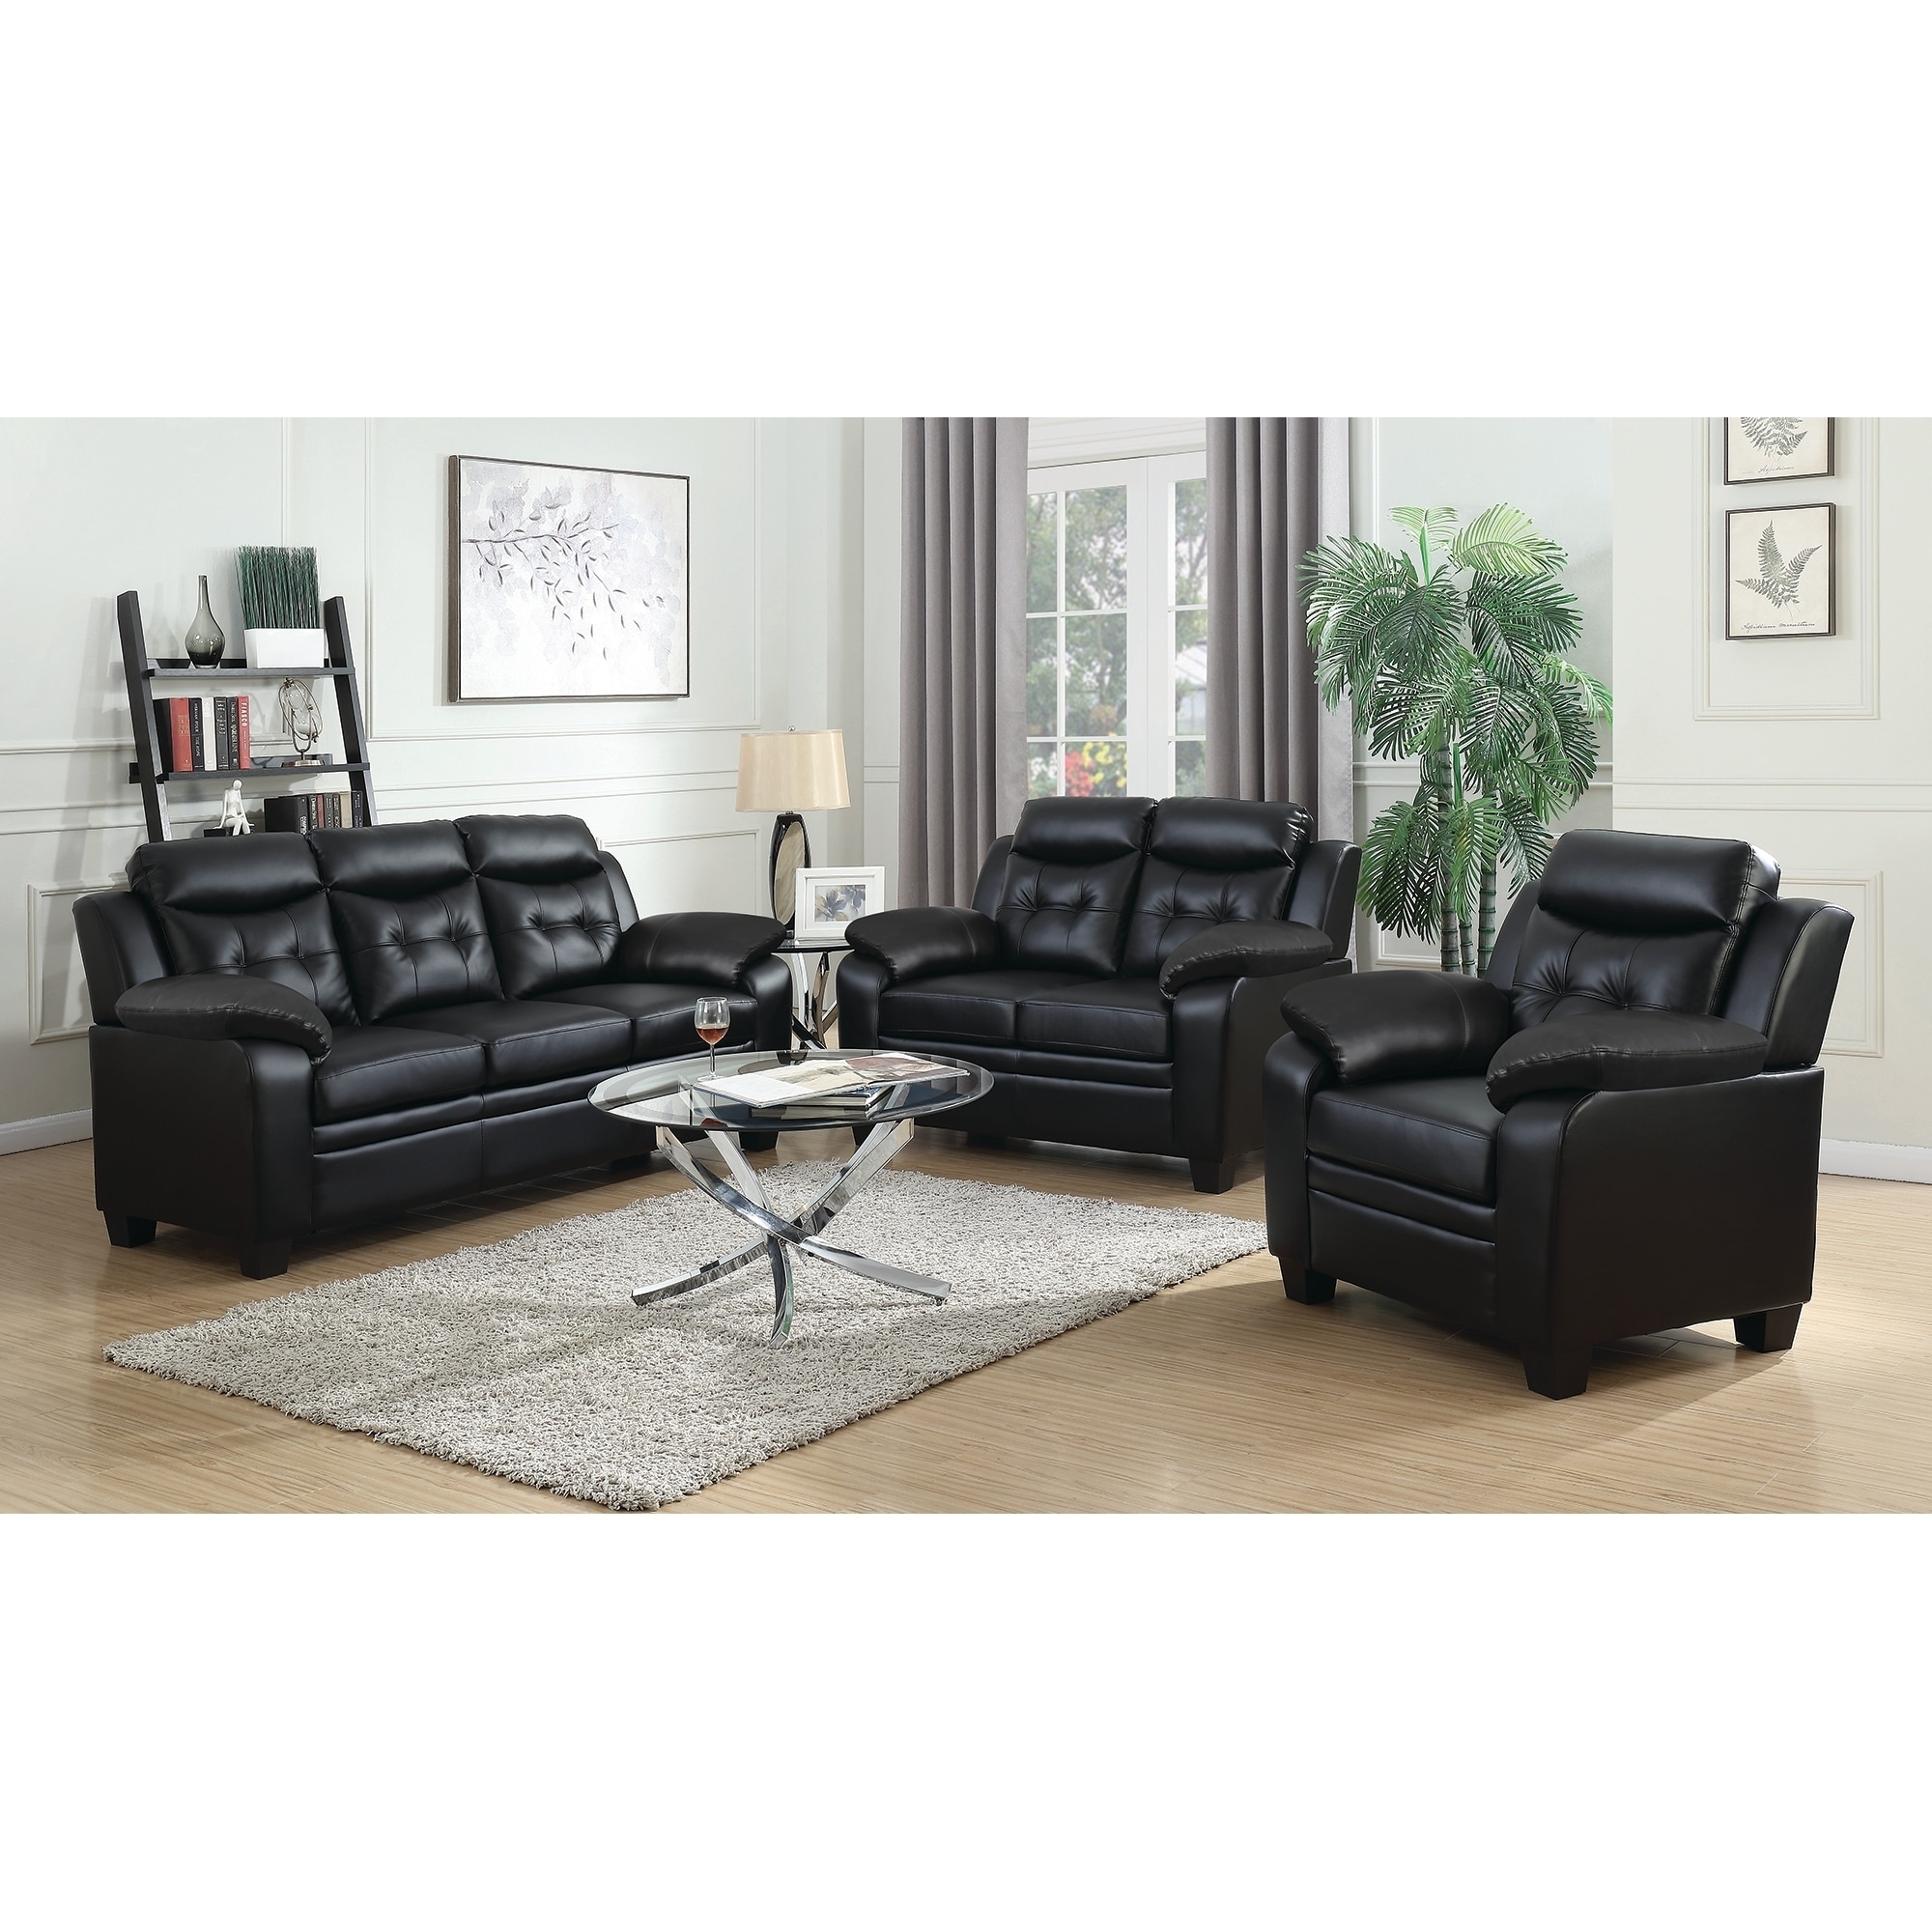 Finley Casual 2piece Living Room Set Brown Casual